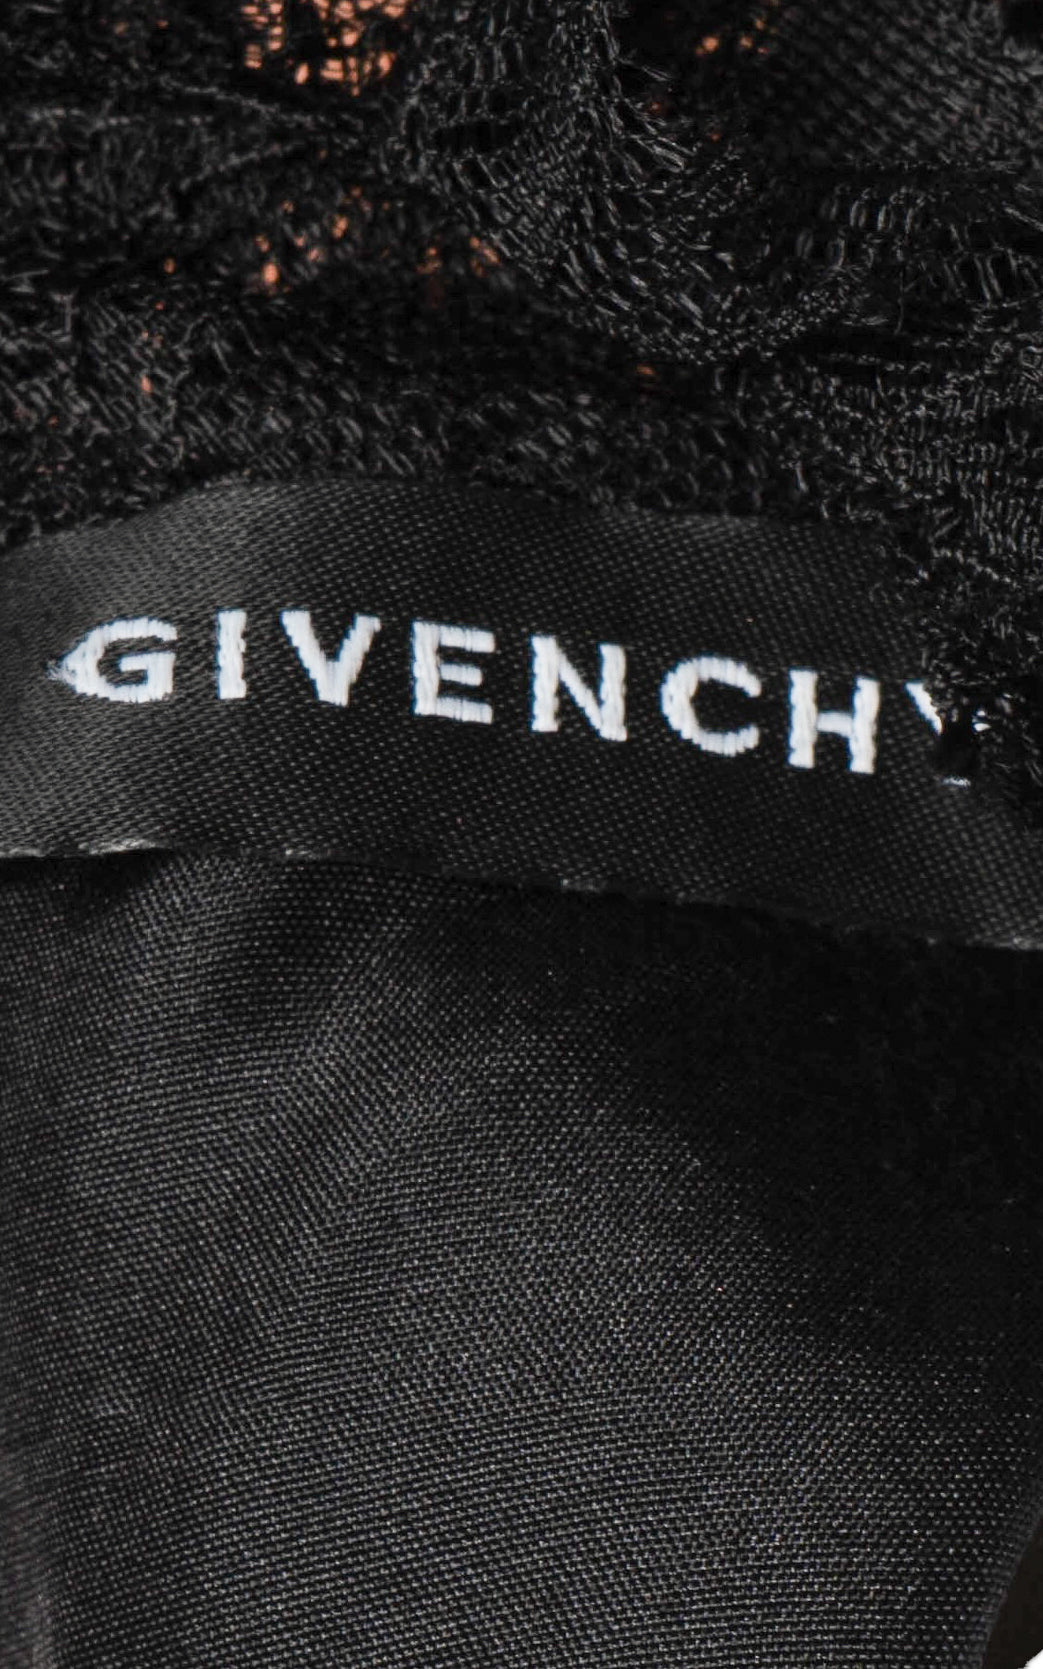 GIVENCHY (RARE) Dress Size: FR 38 / Comparable to US 4-6